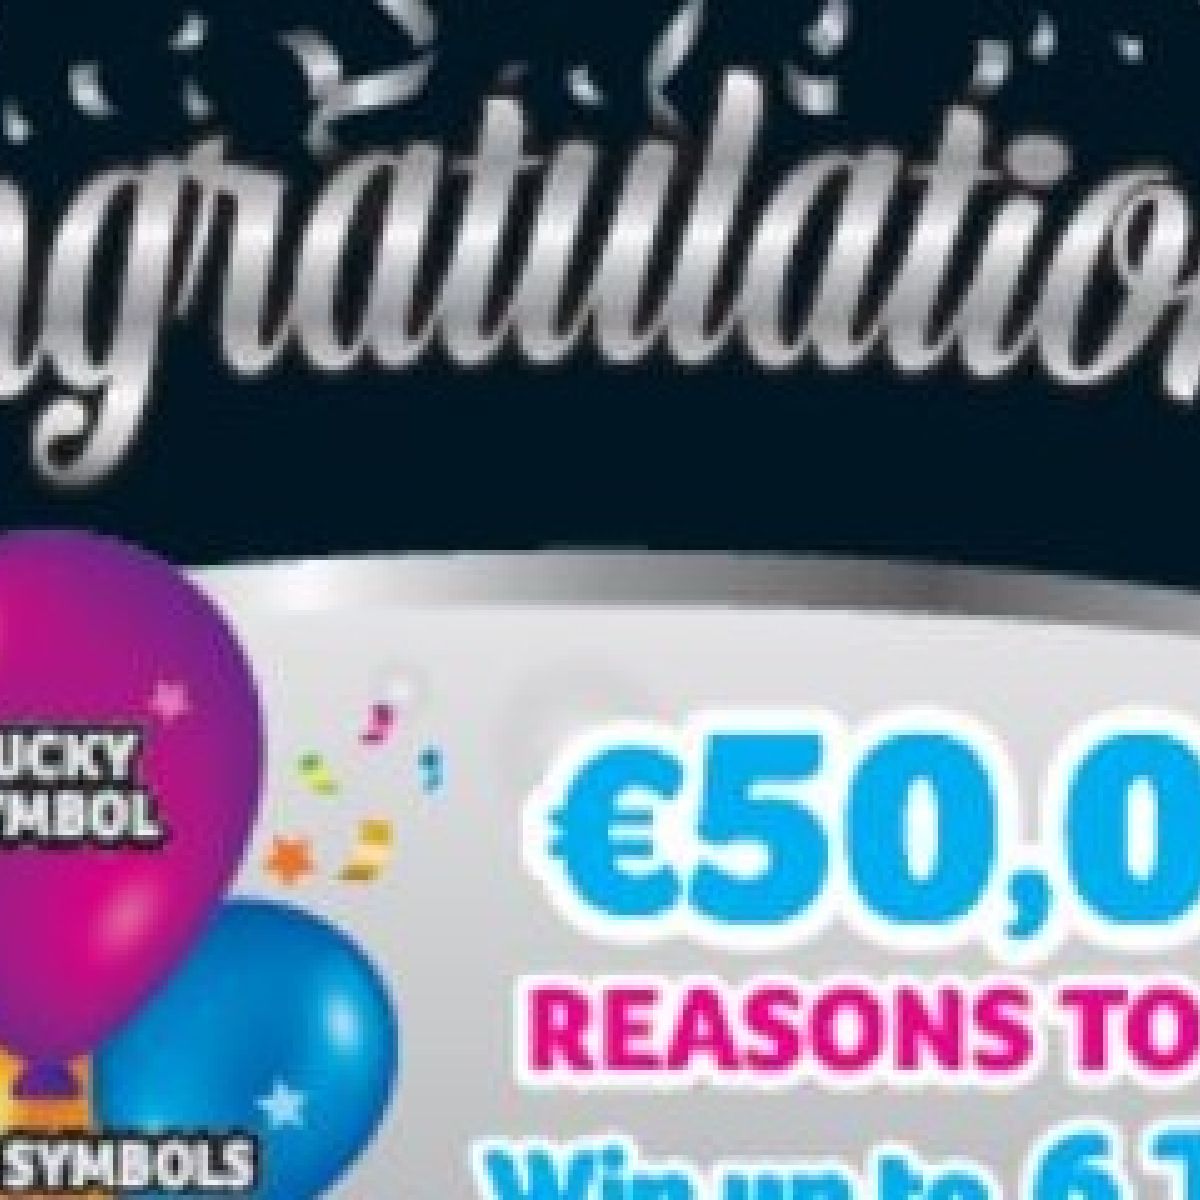 lotto payouts 10 april 2019